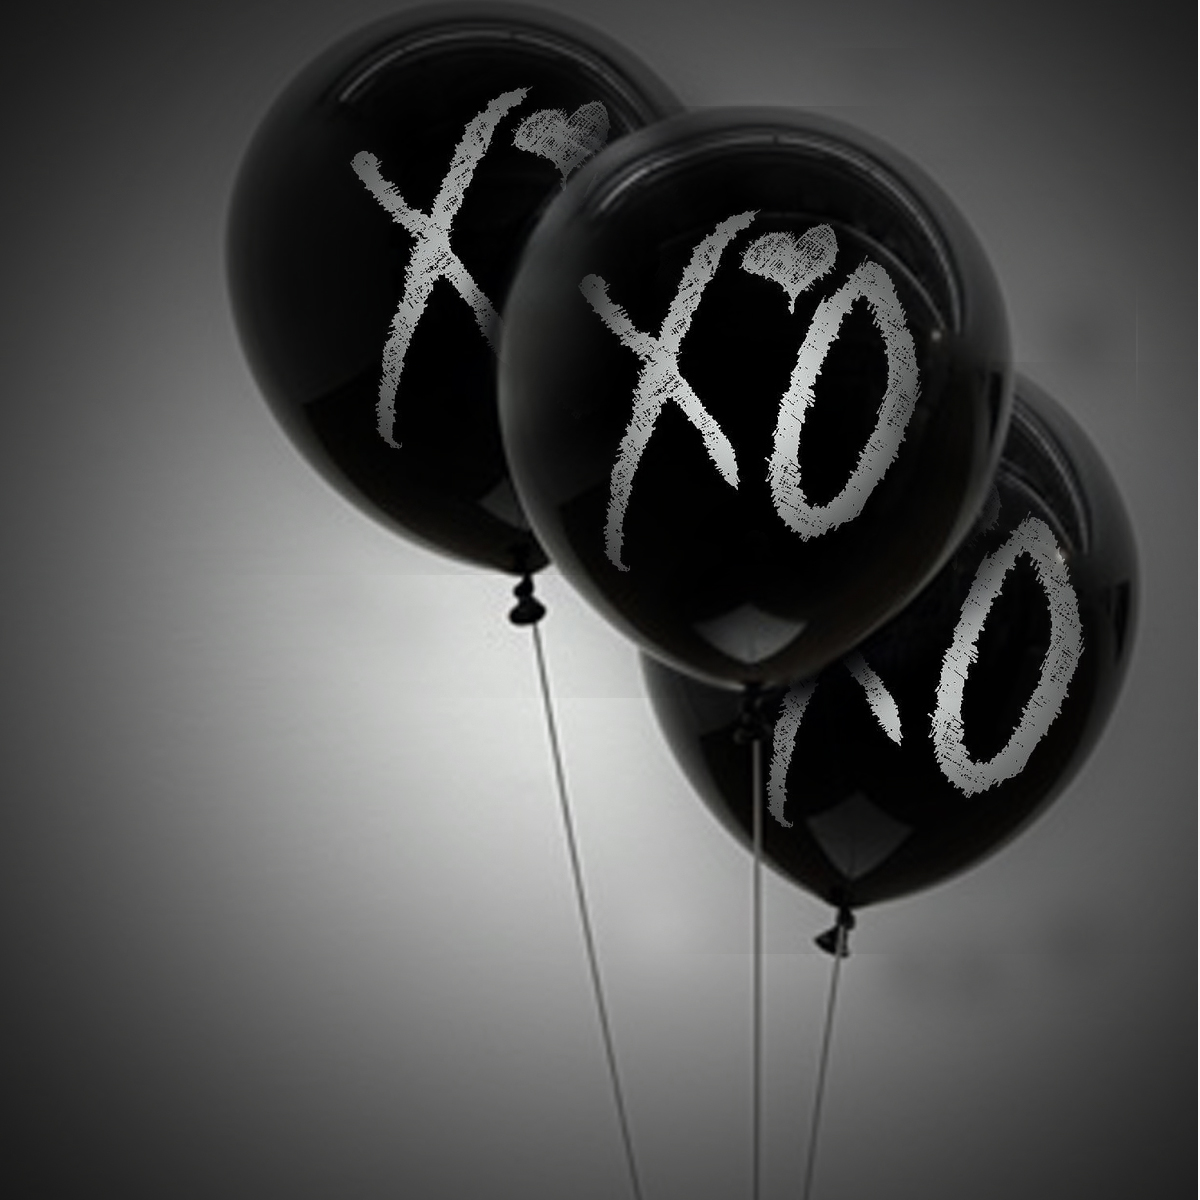 the weeknd wallpaper,balloon,black,party supply,still life photography,black and white